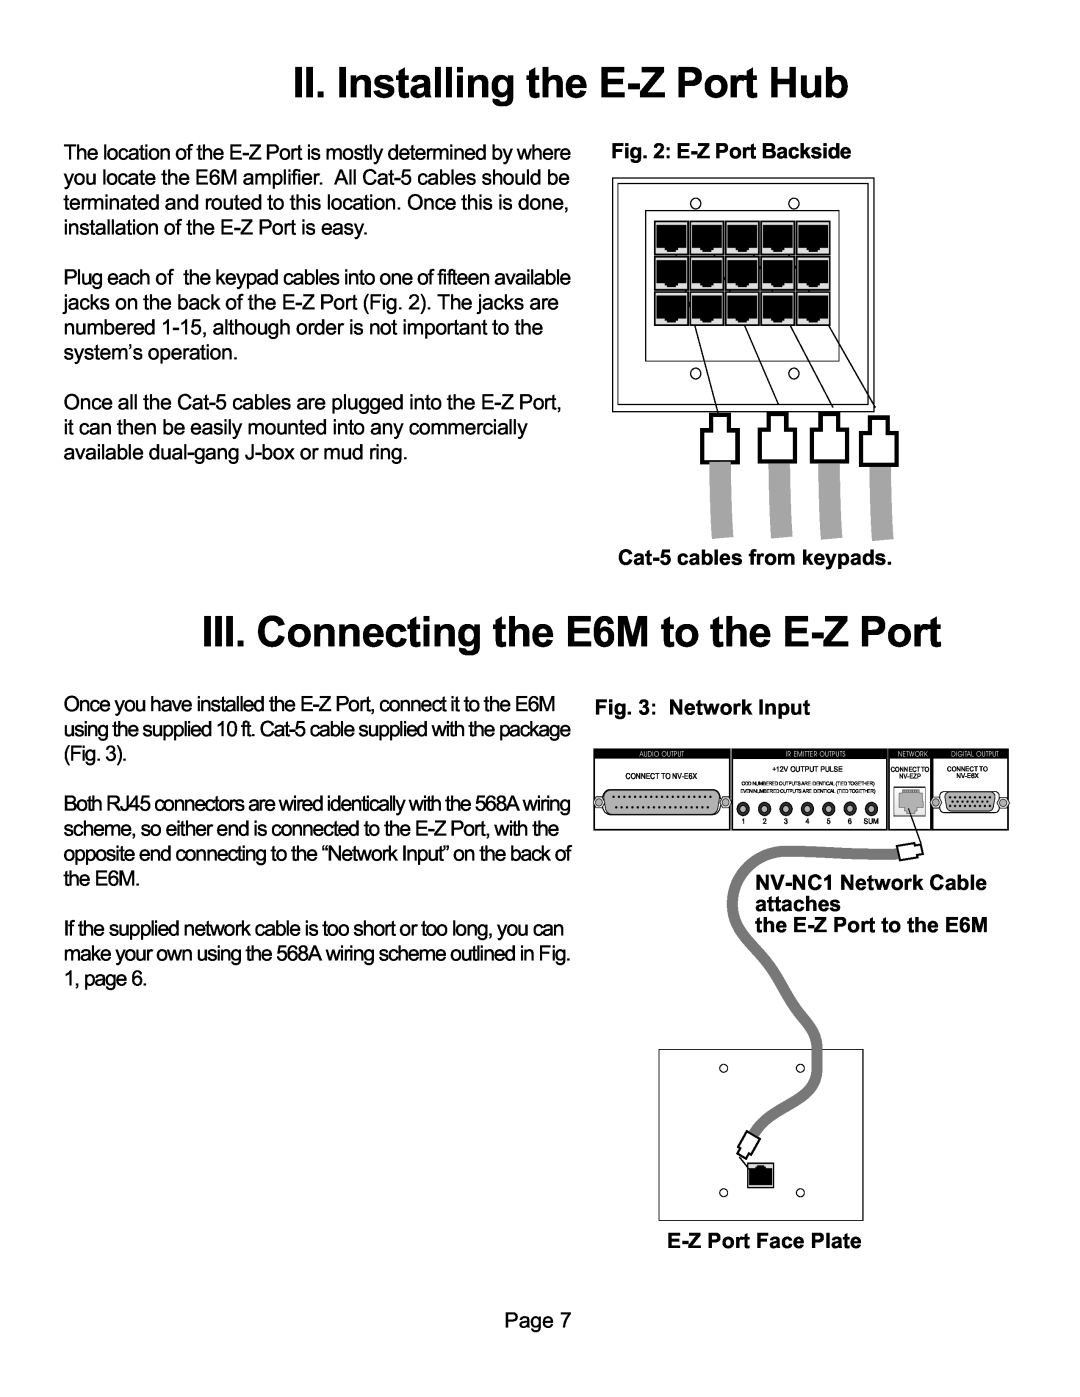 Nuvo NV-E6XS, NV-E6MS II. Installing the E-ZPort Hub, III. Connecting the E6M to the E-ZPort, Cat-5cables from keypads 